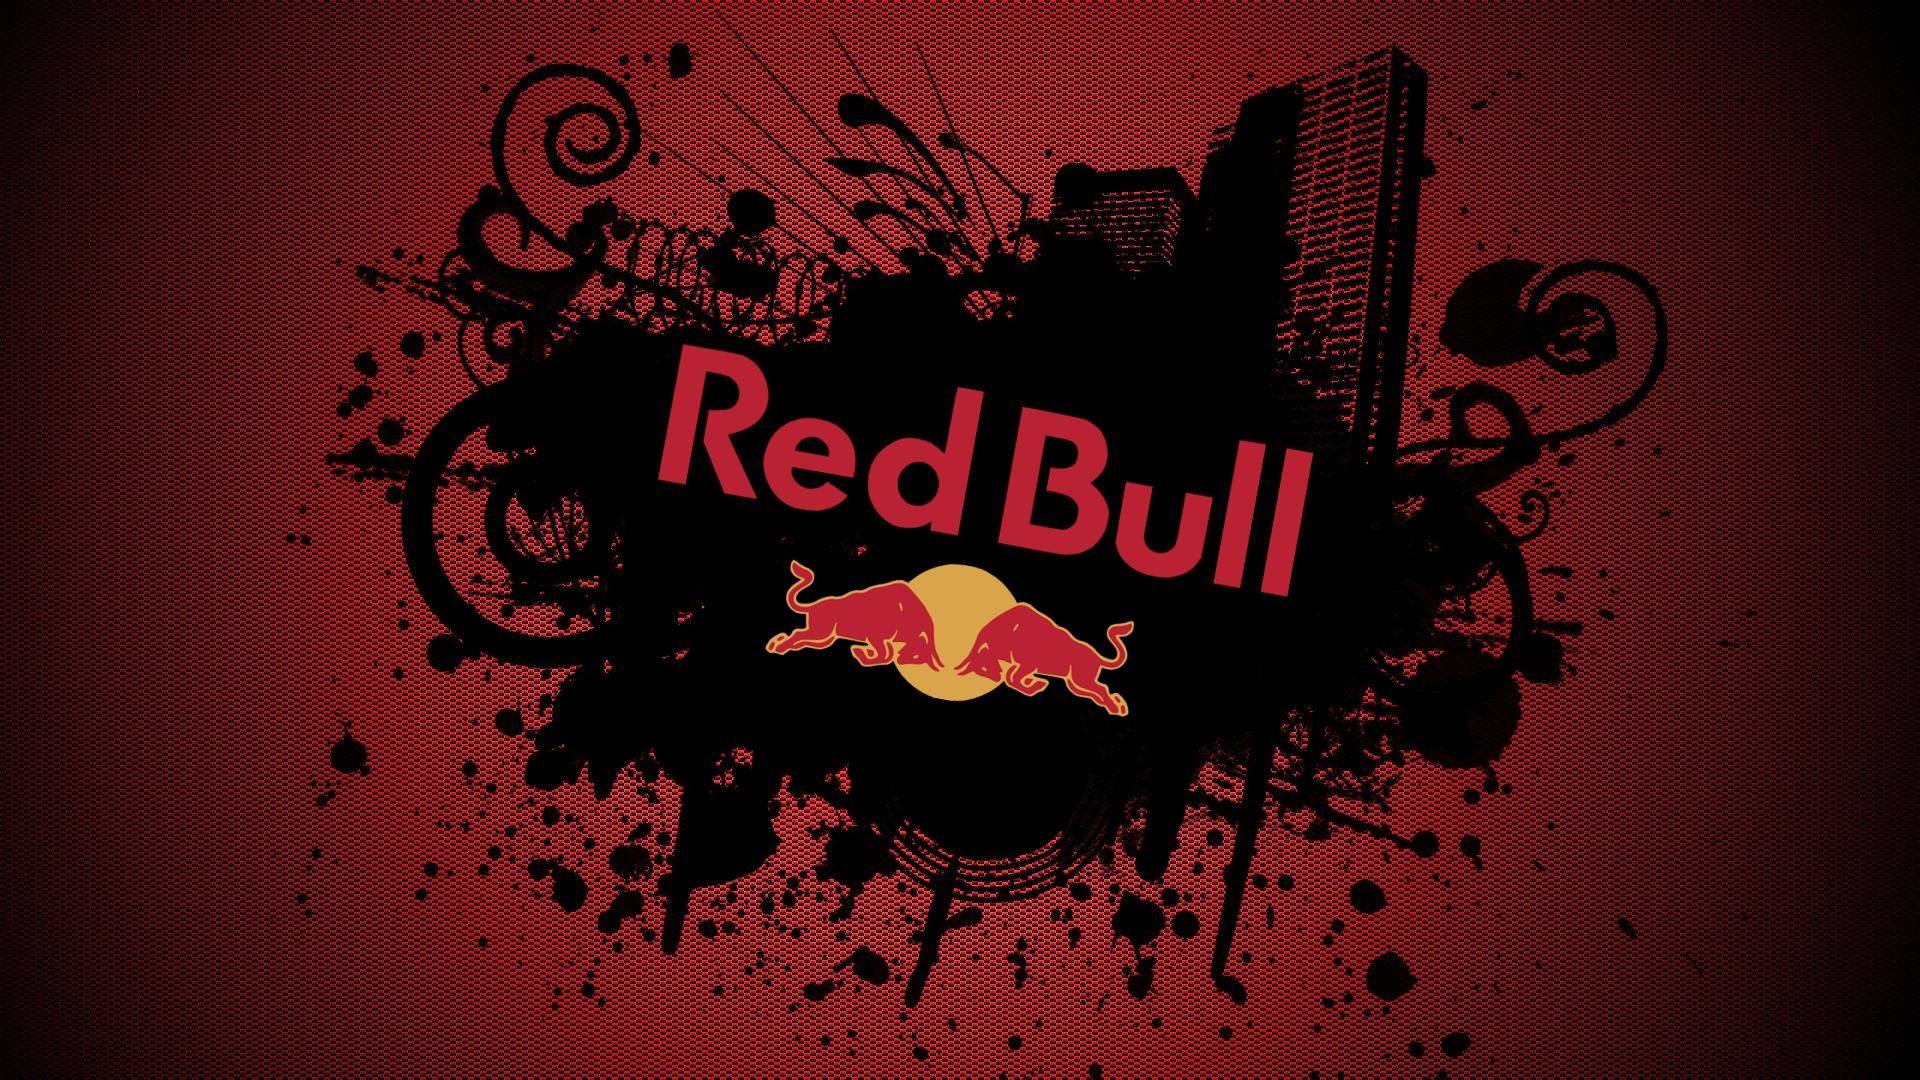 Red Bull Logo: A market leader, Energy drink, Tastes like carbonated cough syrup. 1920x1080 Full HD Background.